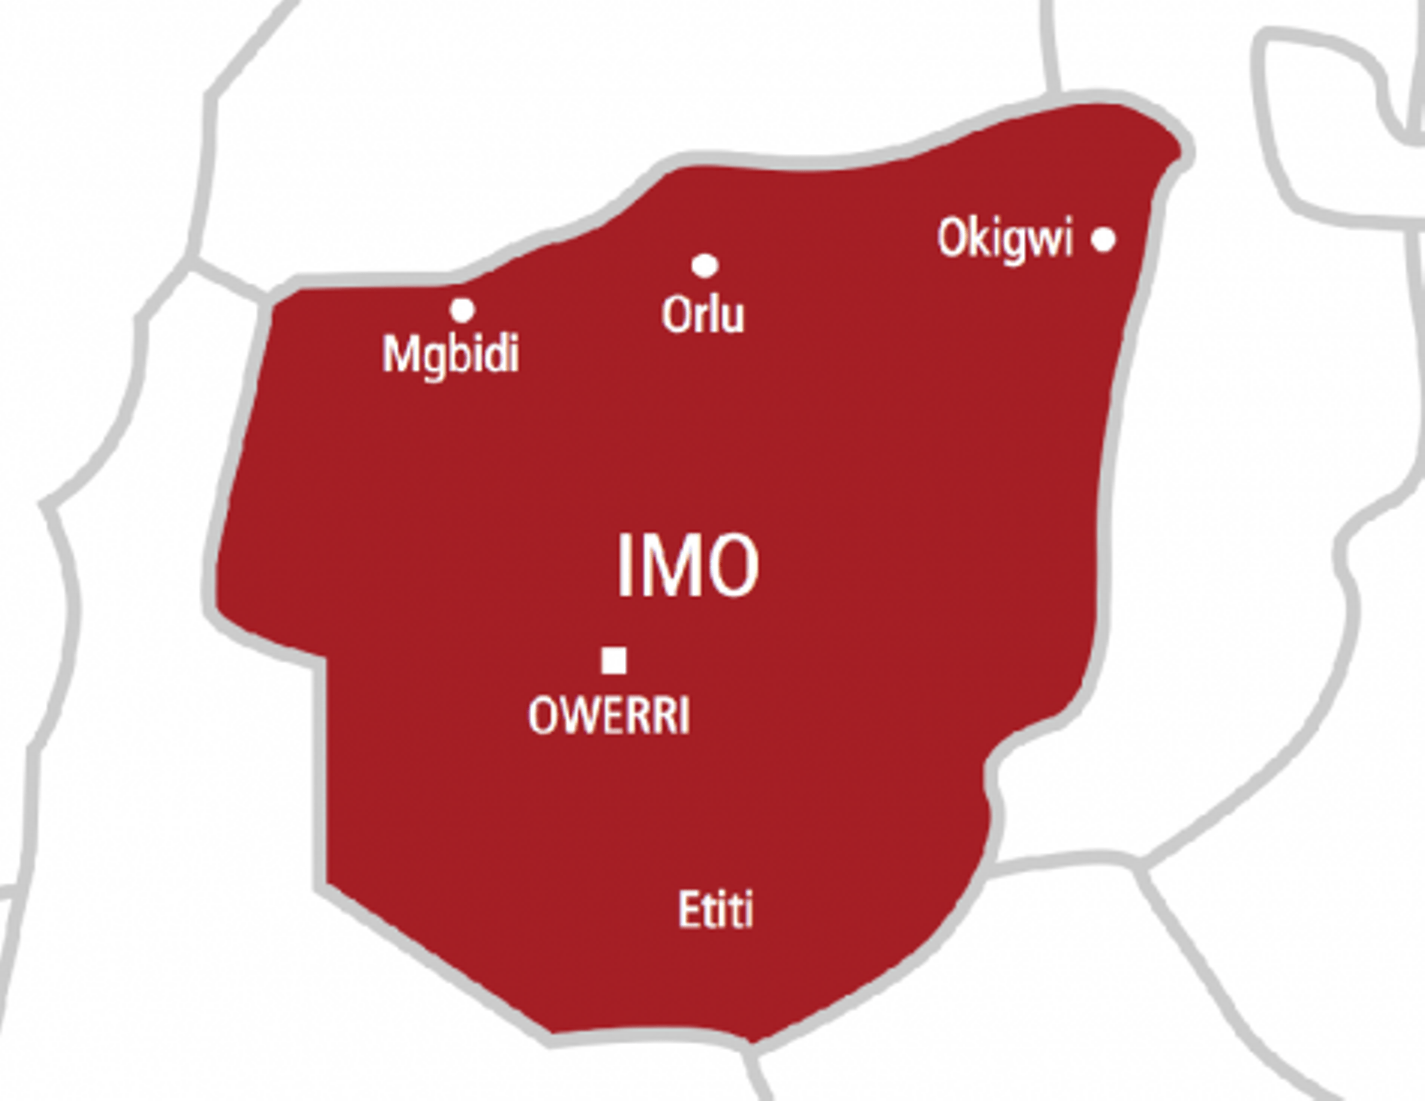 Motorcyclist Allegedly Stabs Man To Death In Imo